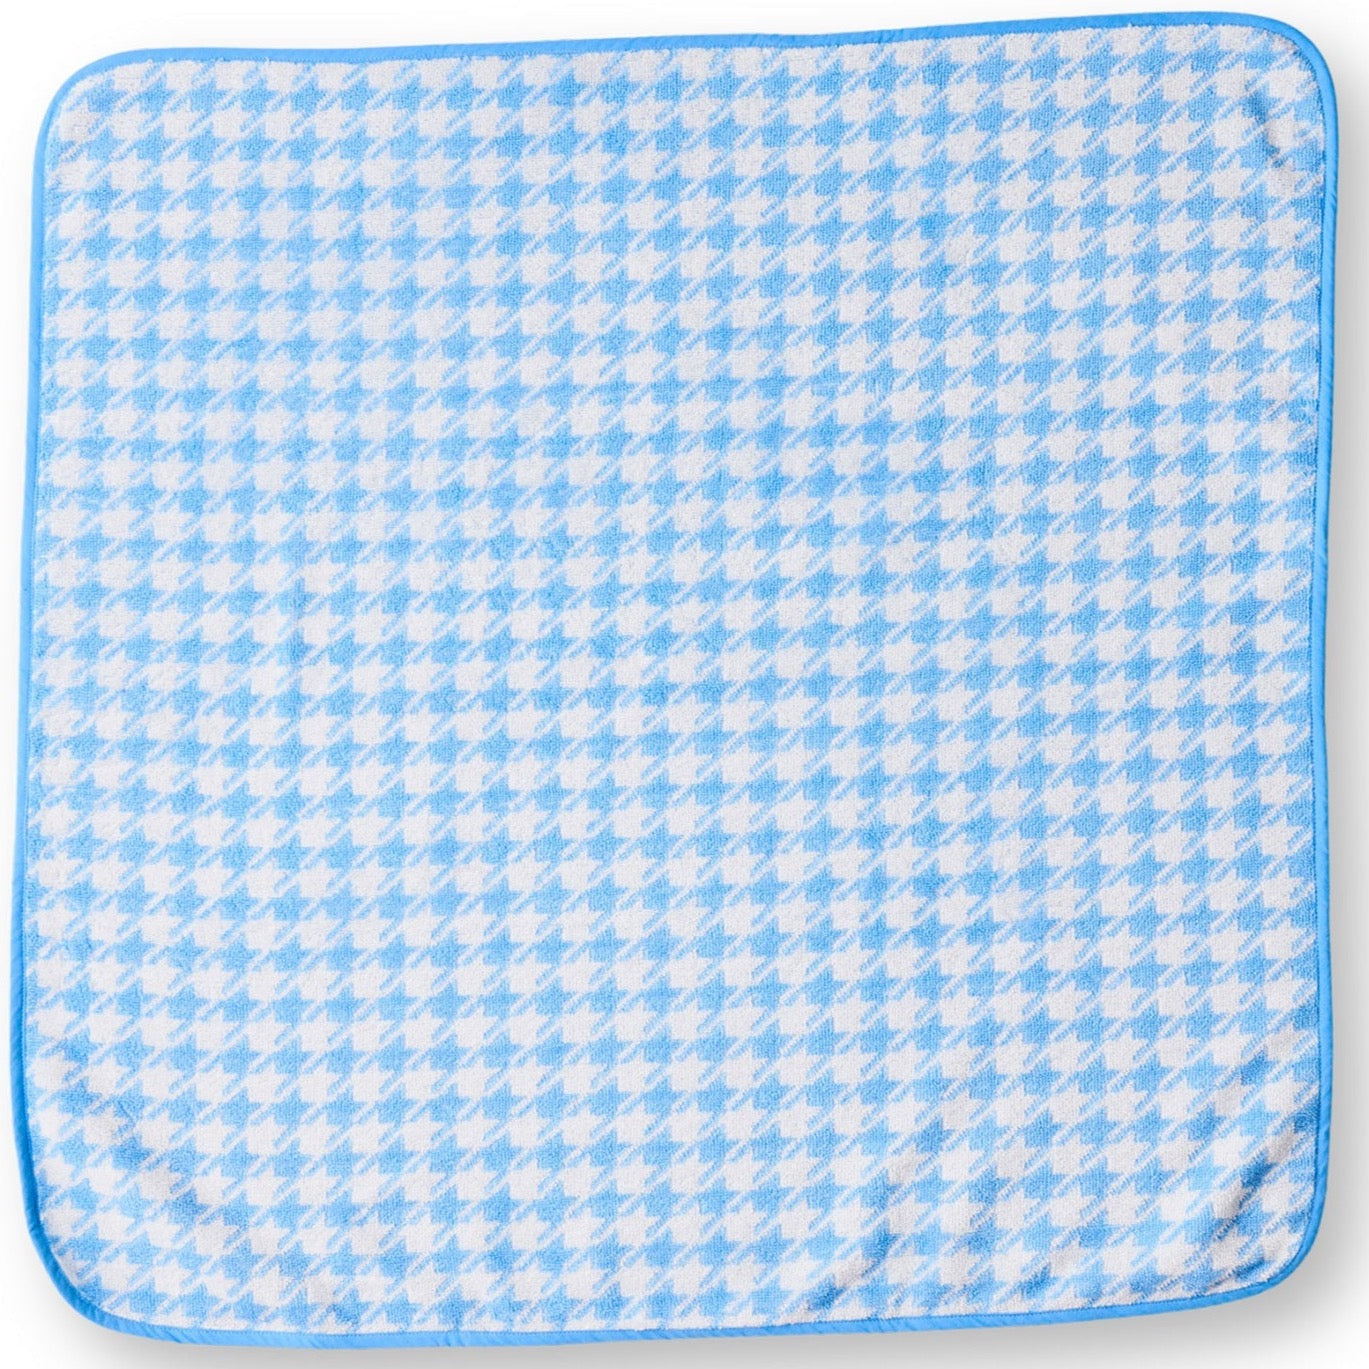 Houndstooth Blue Terry Baby Towel